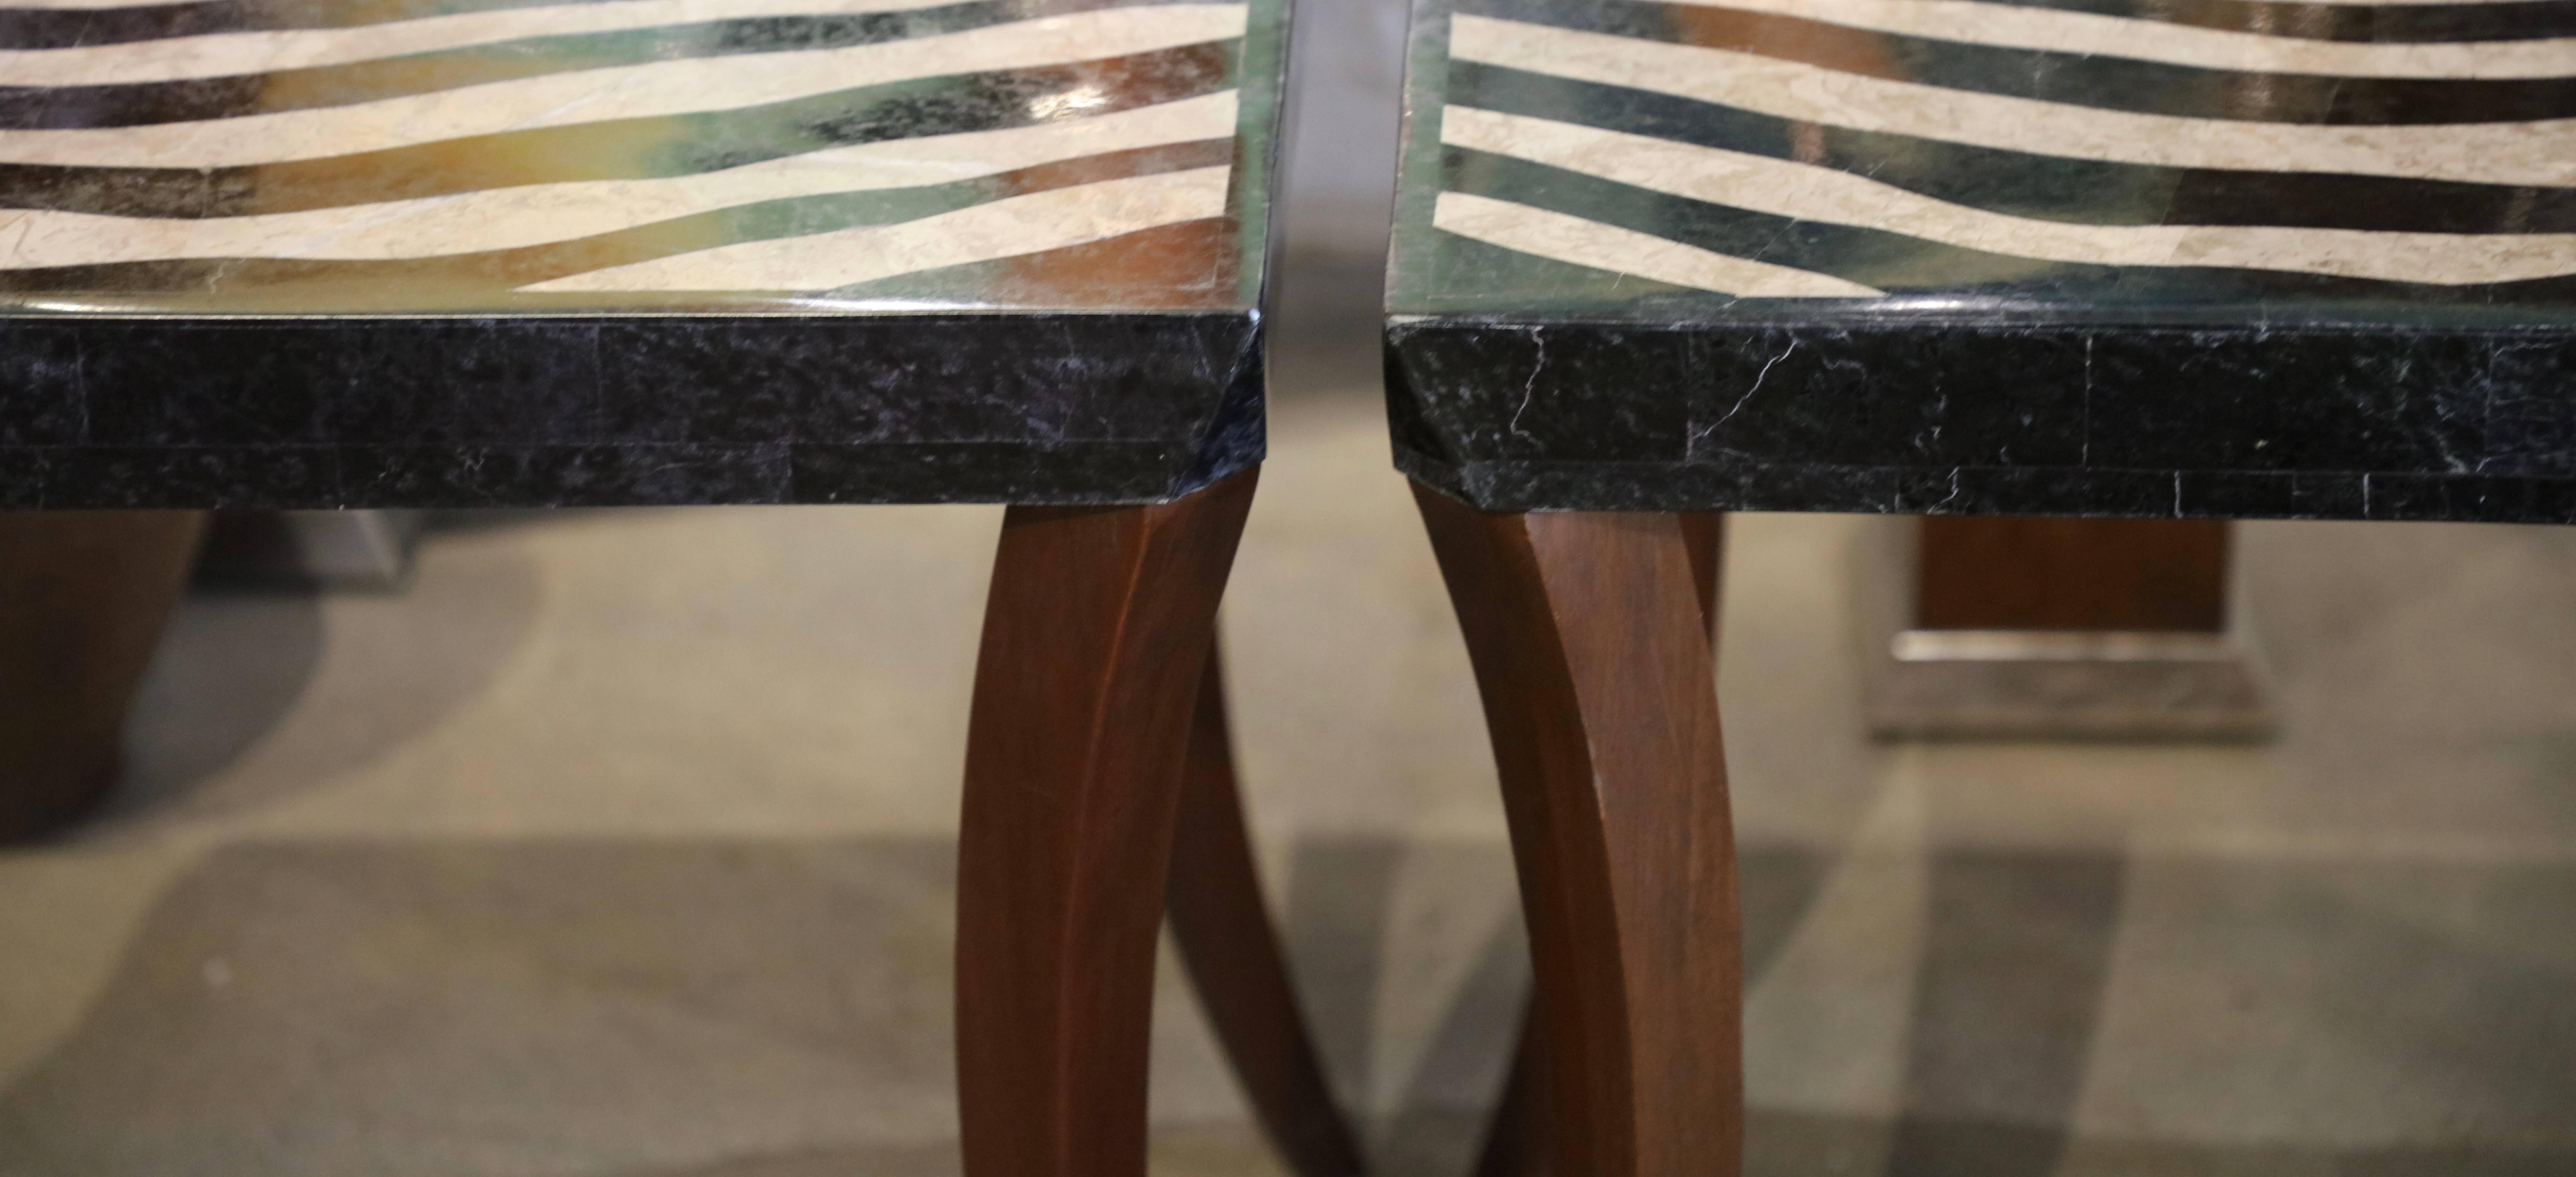 American Pair of Inlaid Marble Tables Likely Maitland-Smith